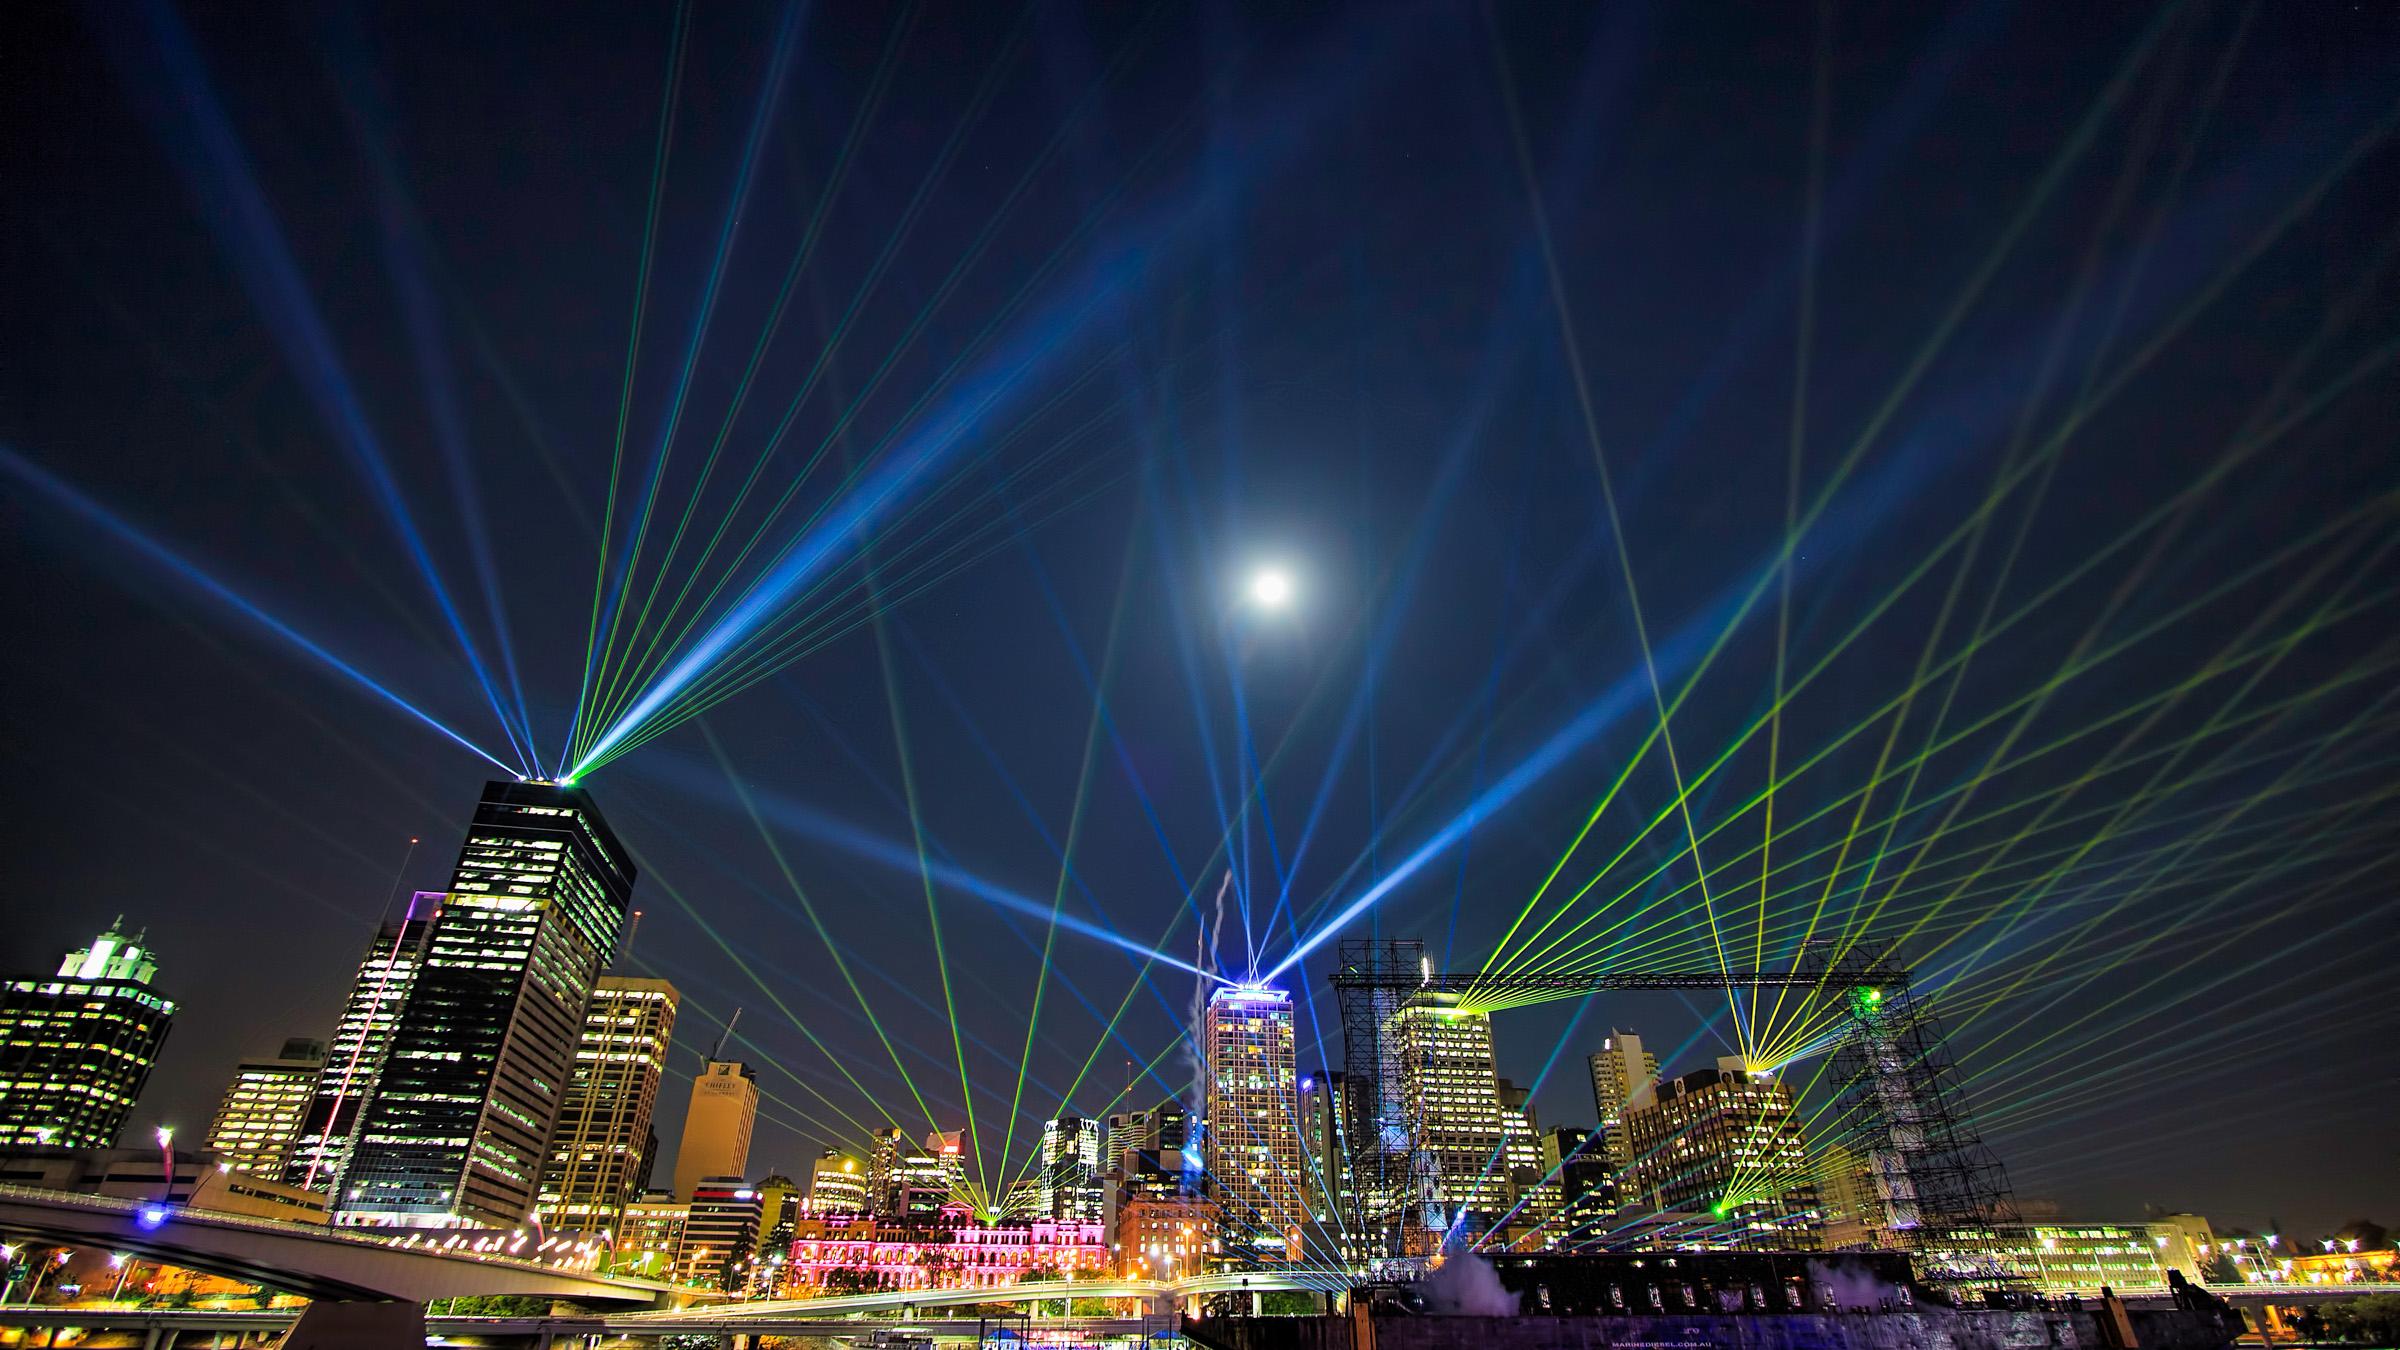 Brisbane CBD skyline at night time lit up in a light show of multi-coloured lasers.